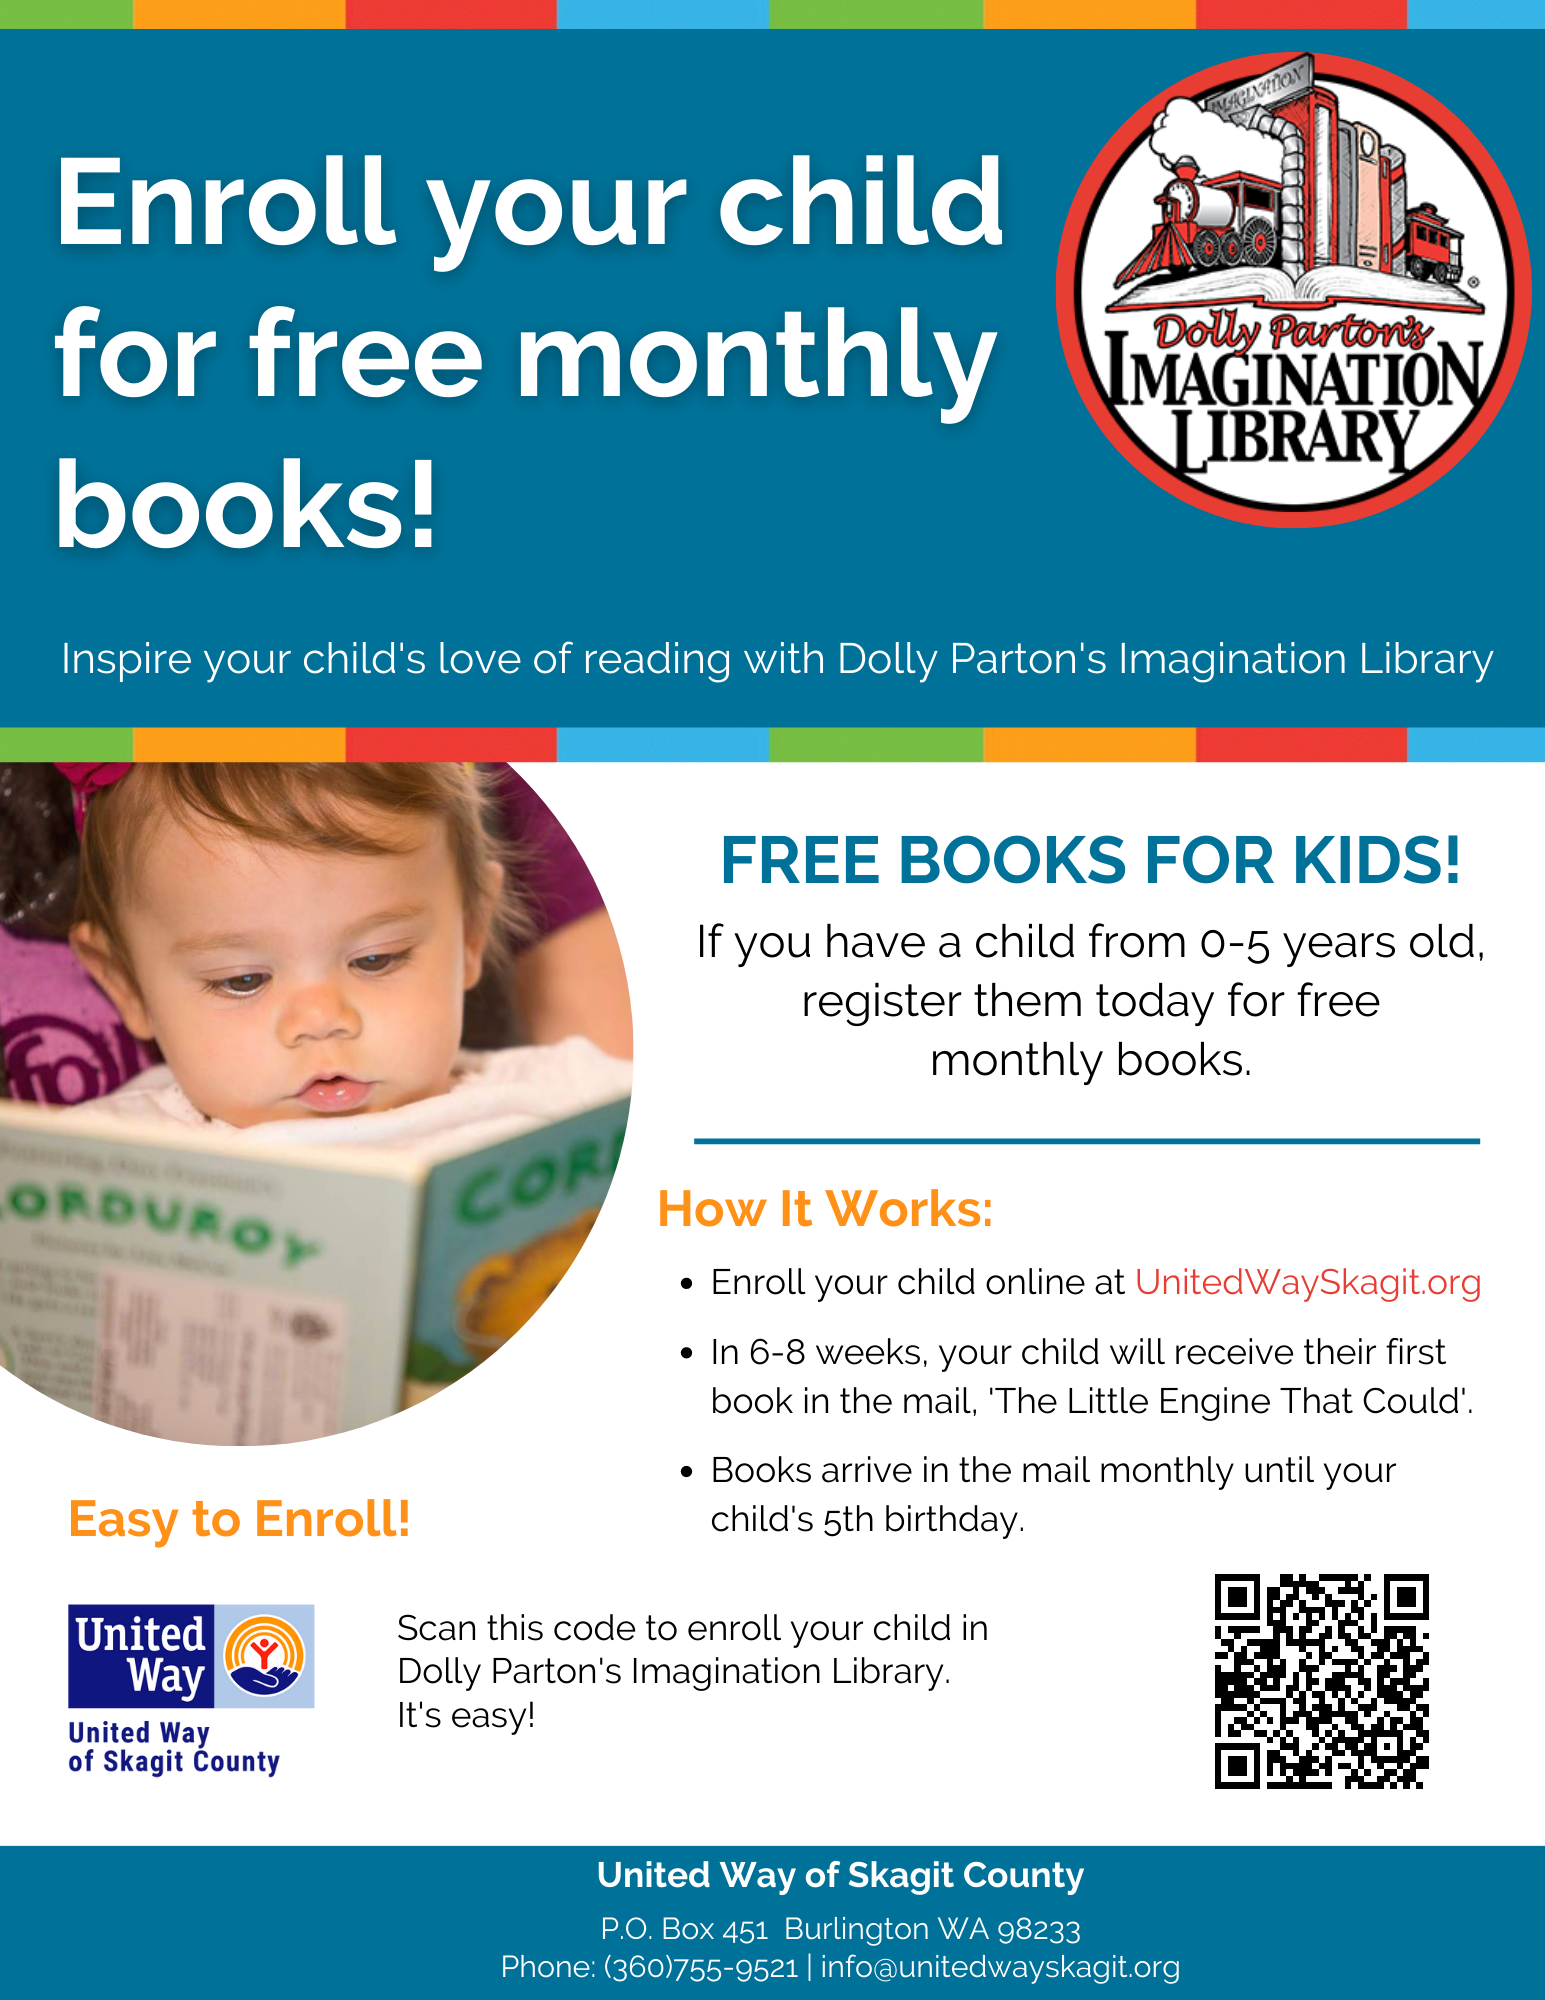 FREE BOOKS FOR KIDS! If you have a child from 0-5 years old, register them today for free monthly books.